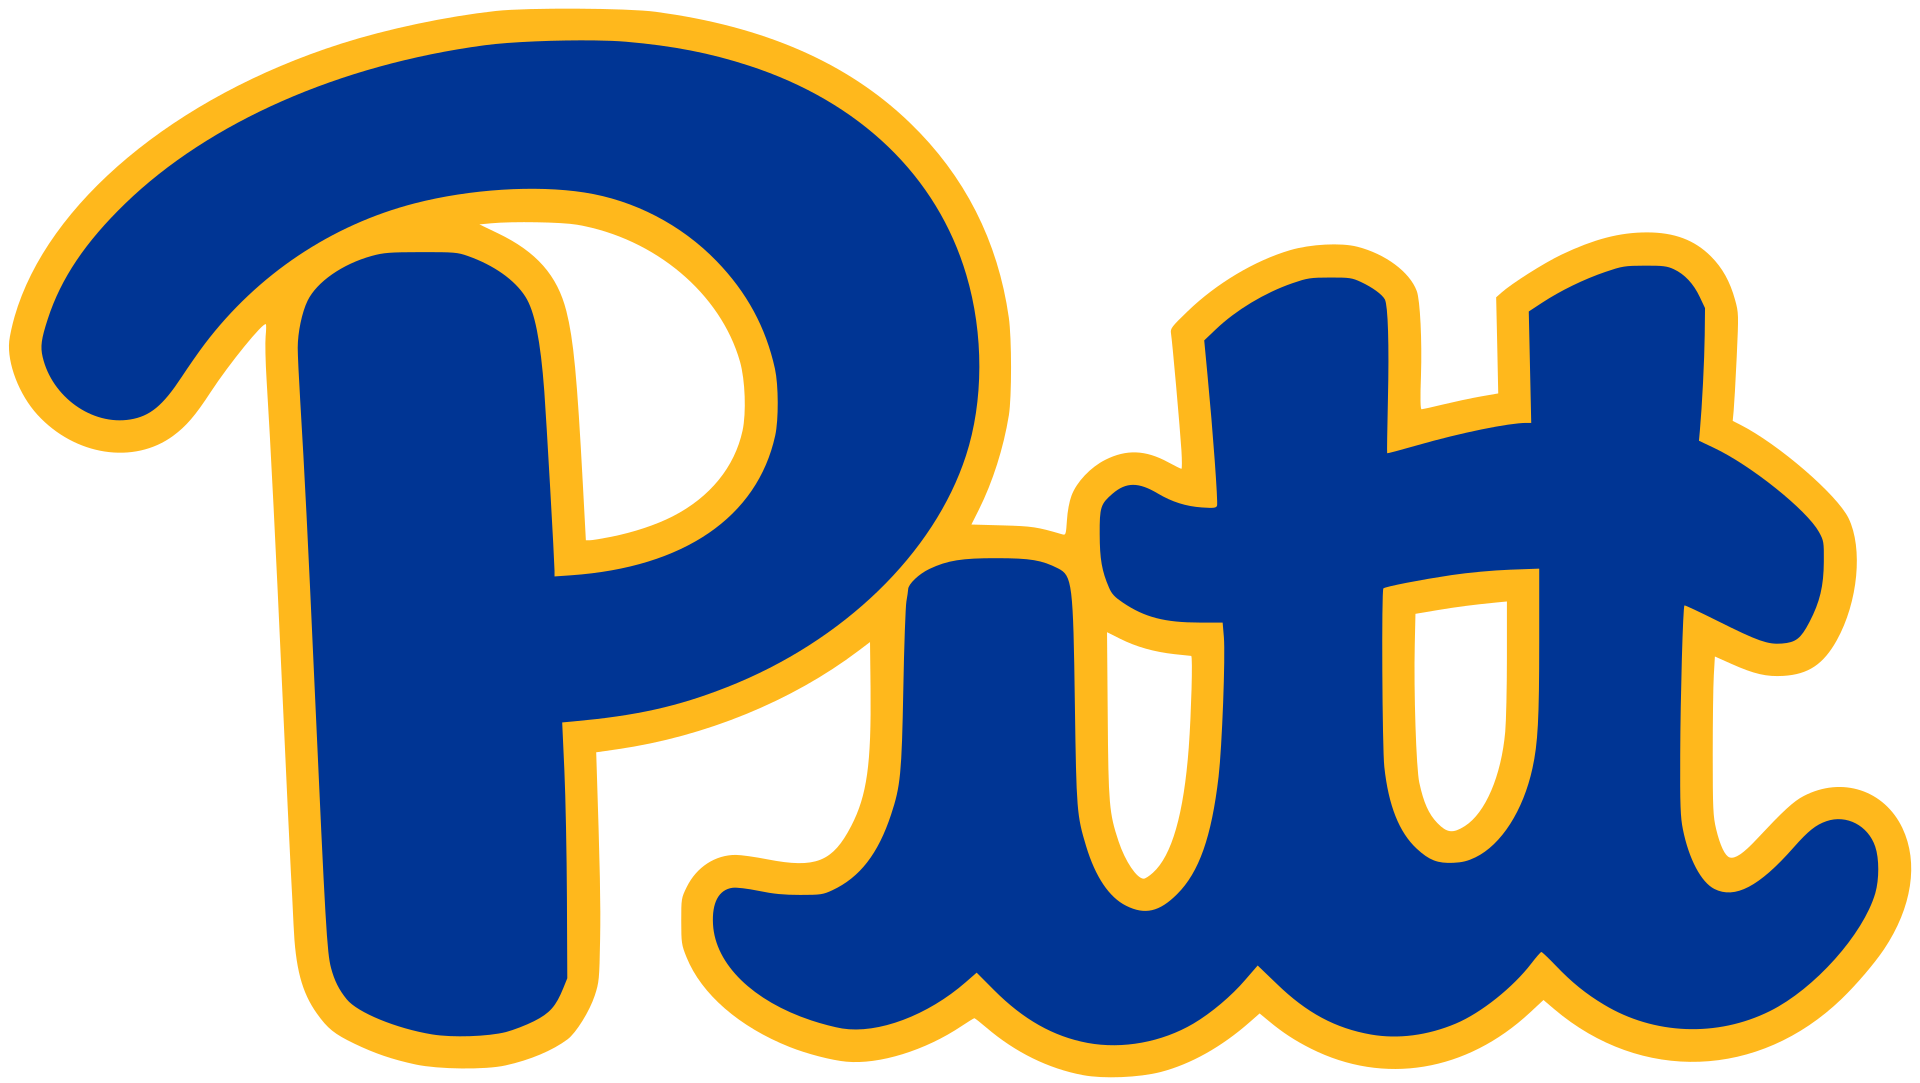 Programme TV Pittsburgh Panthers